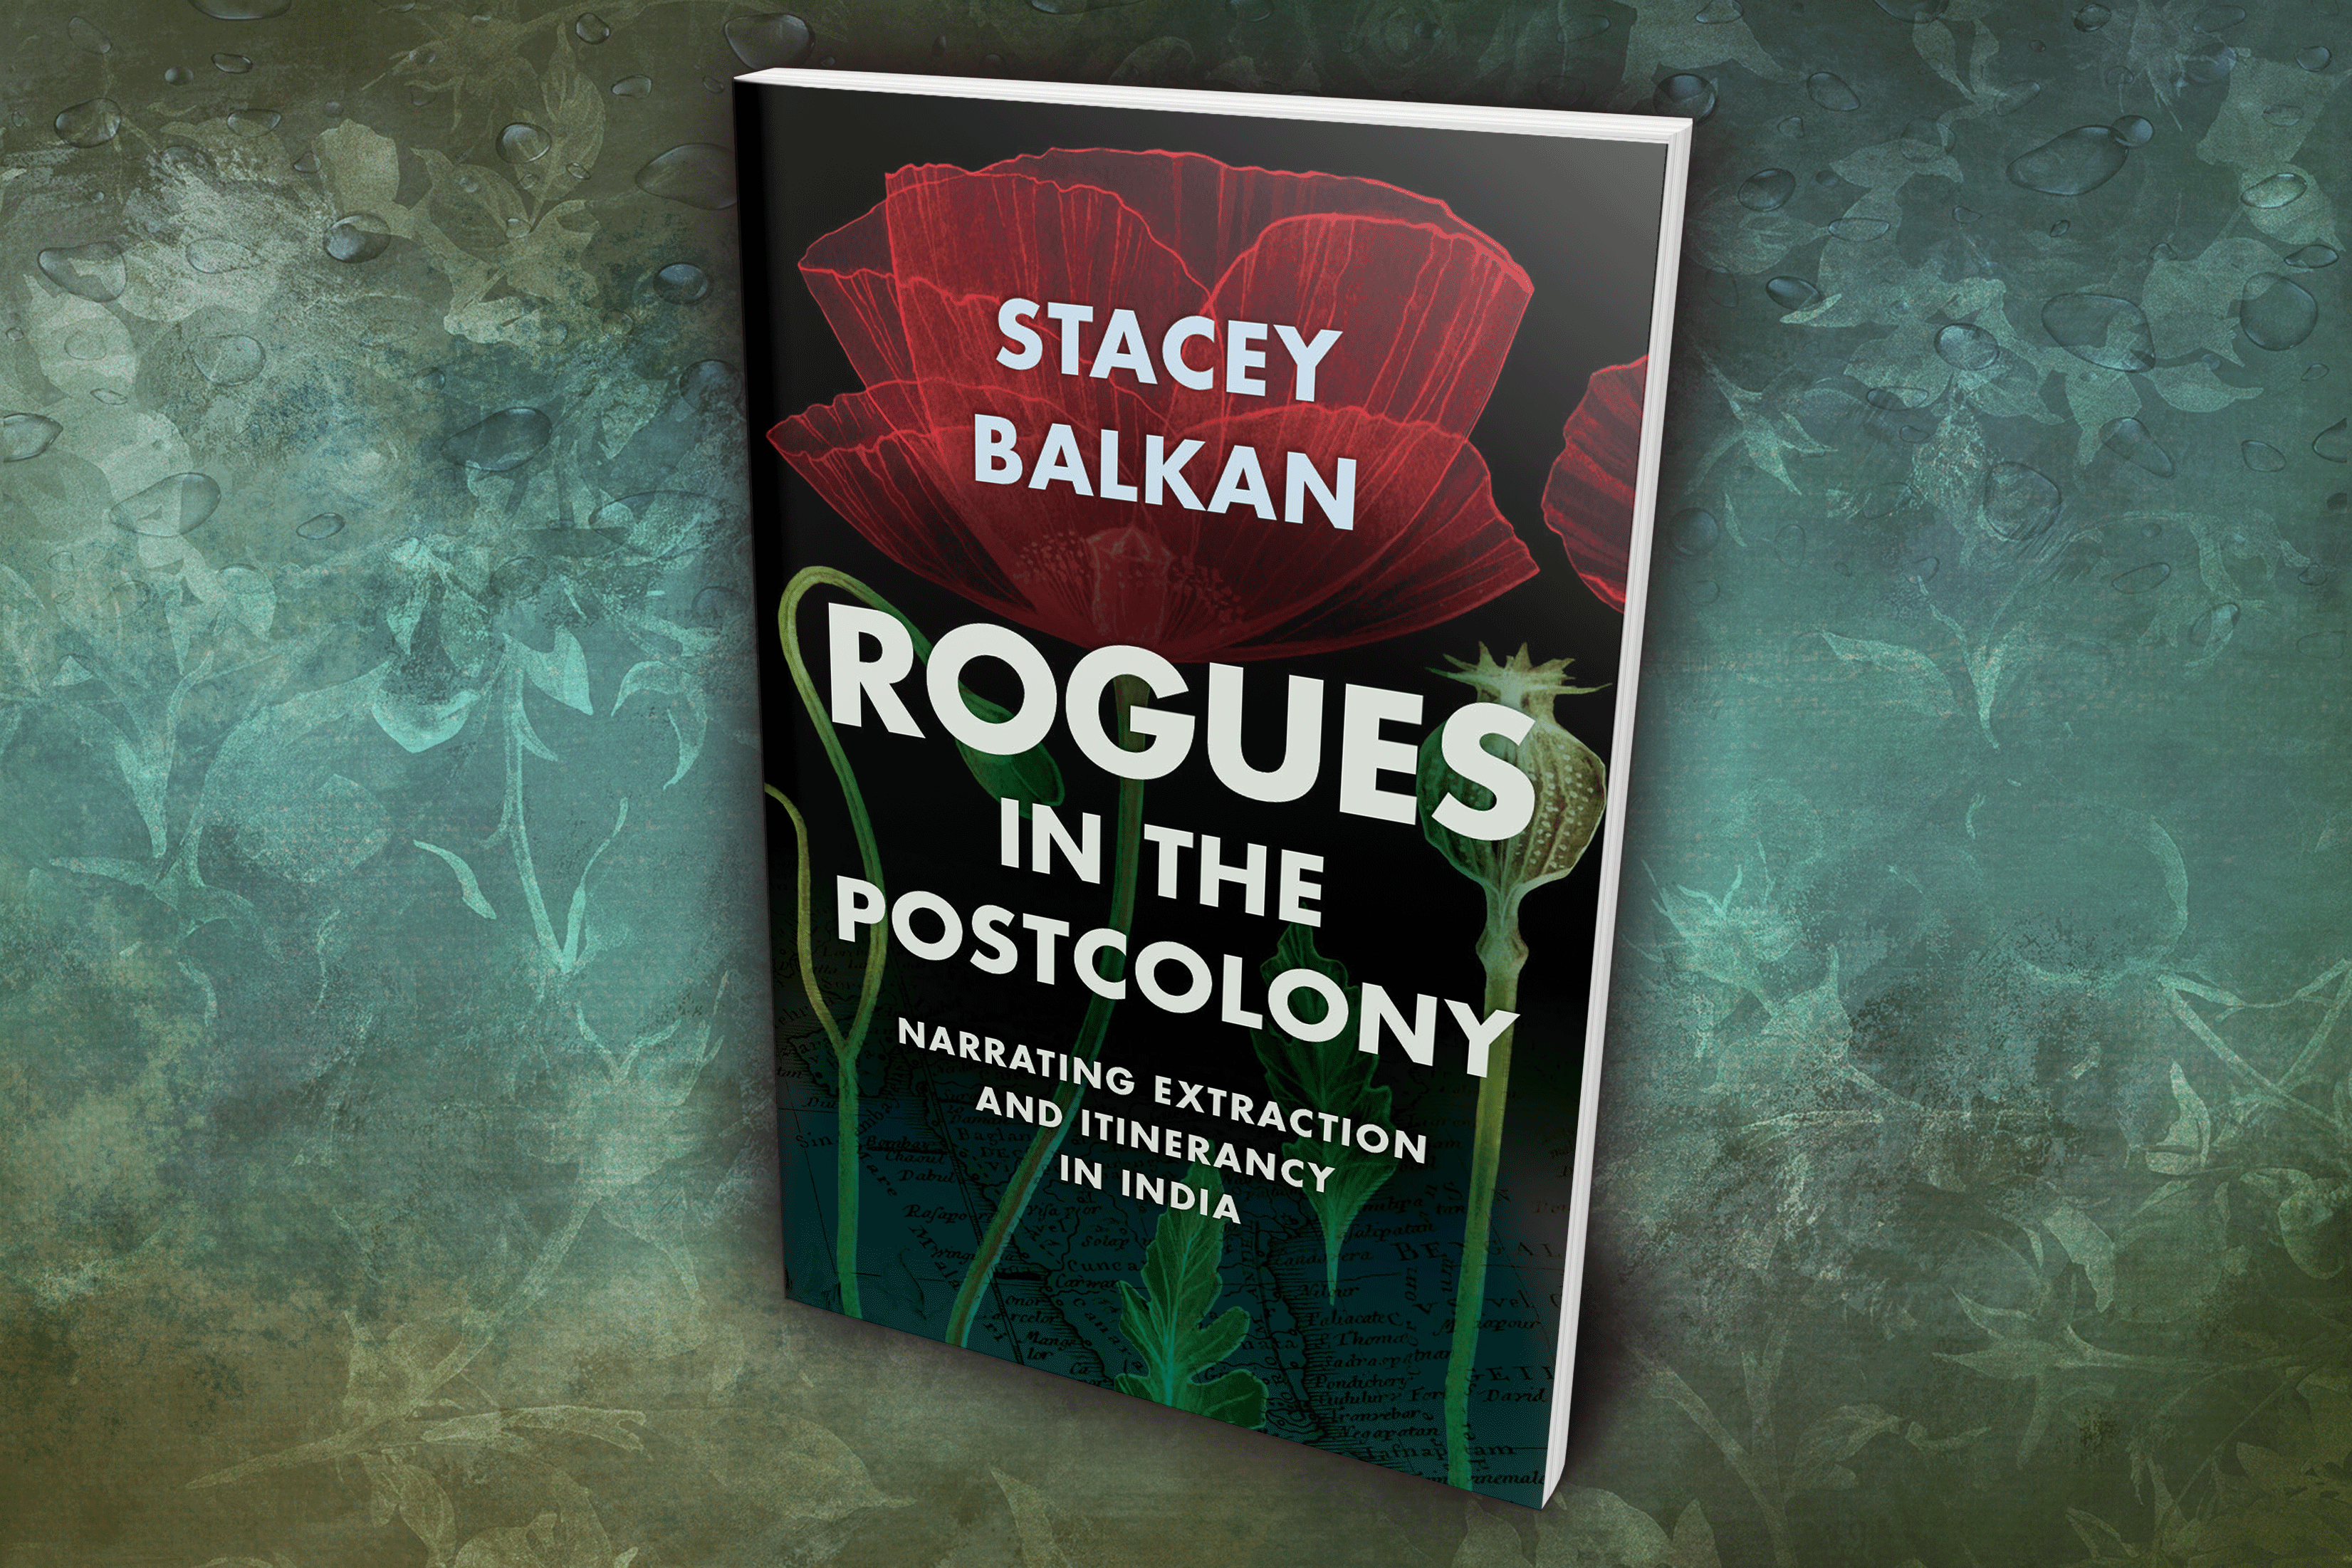 Rogues in the Postcolony